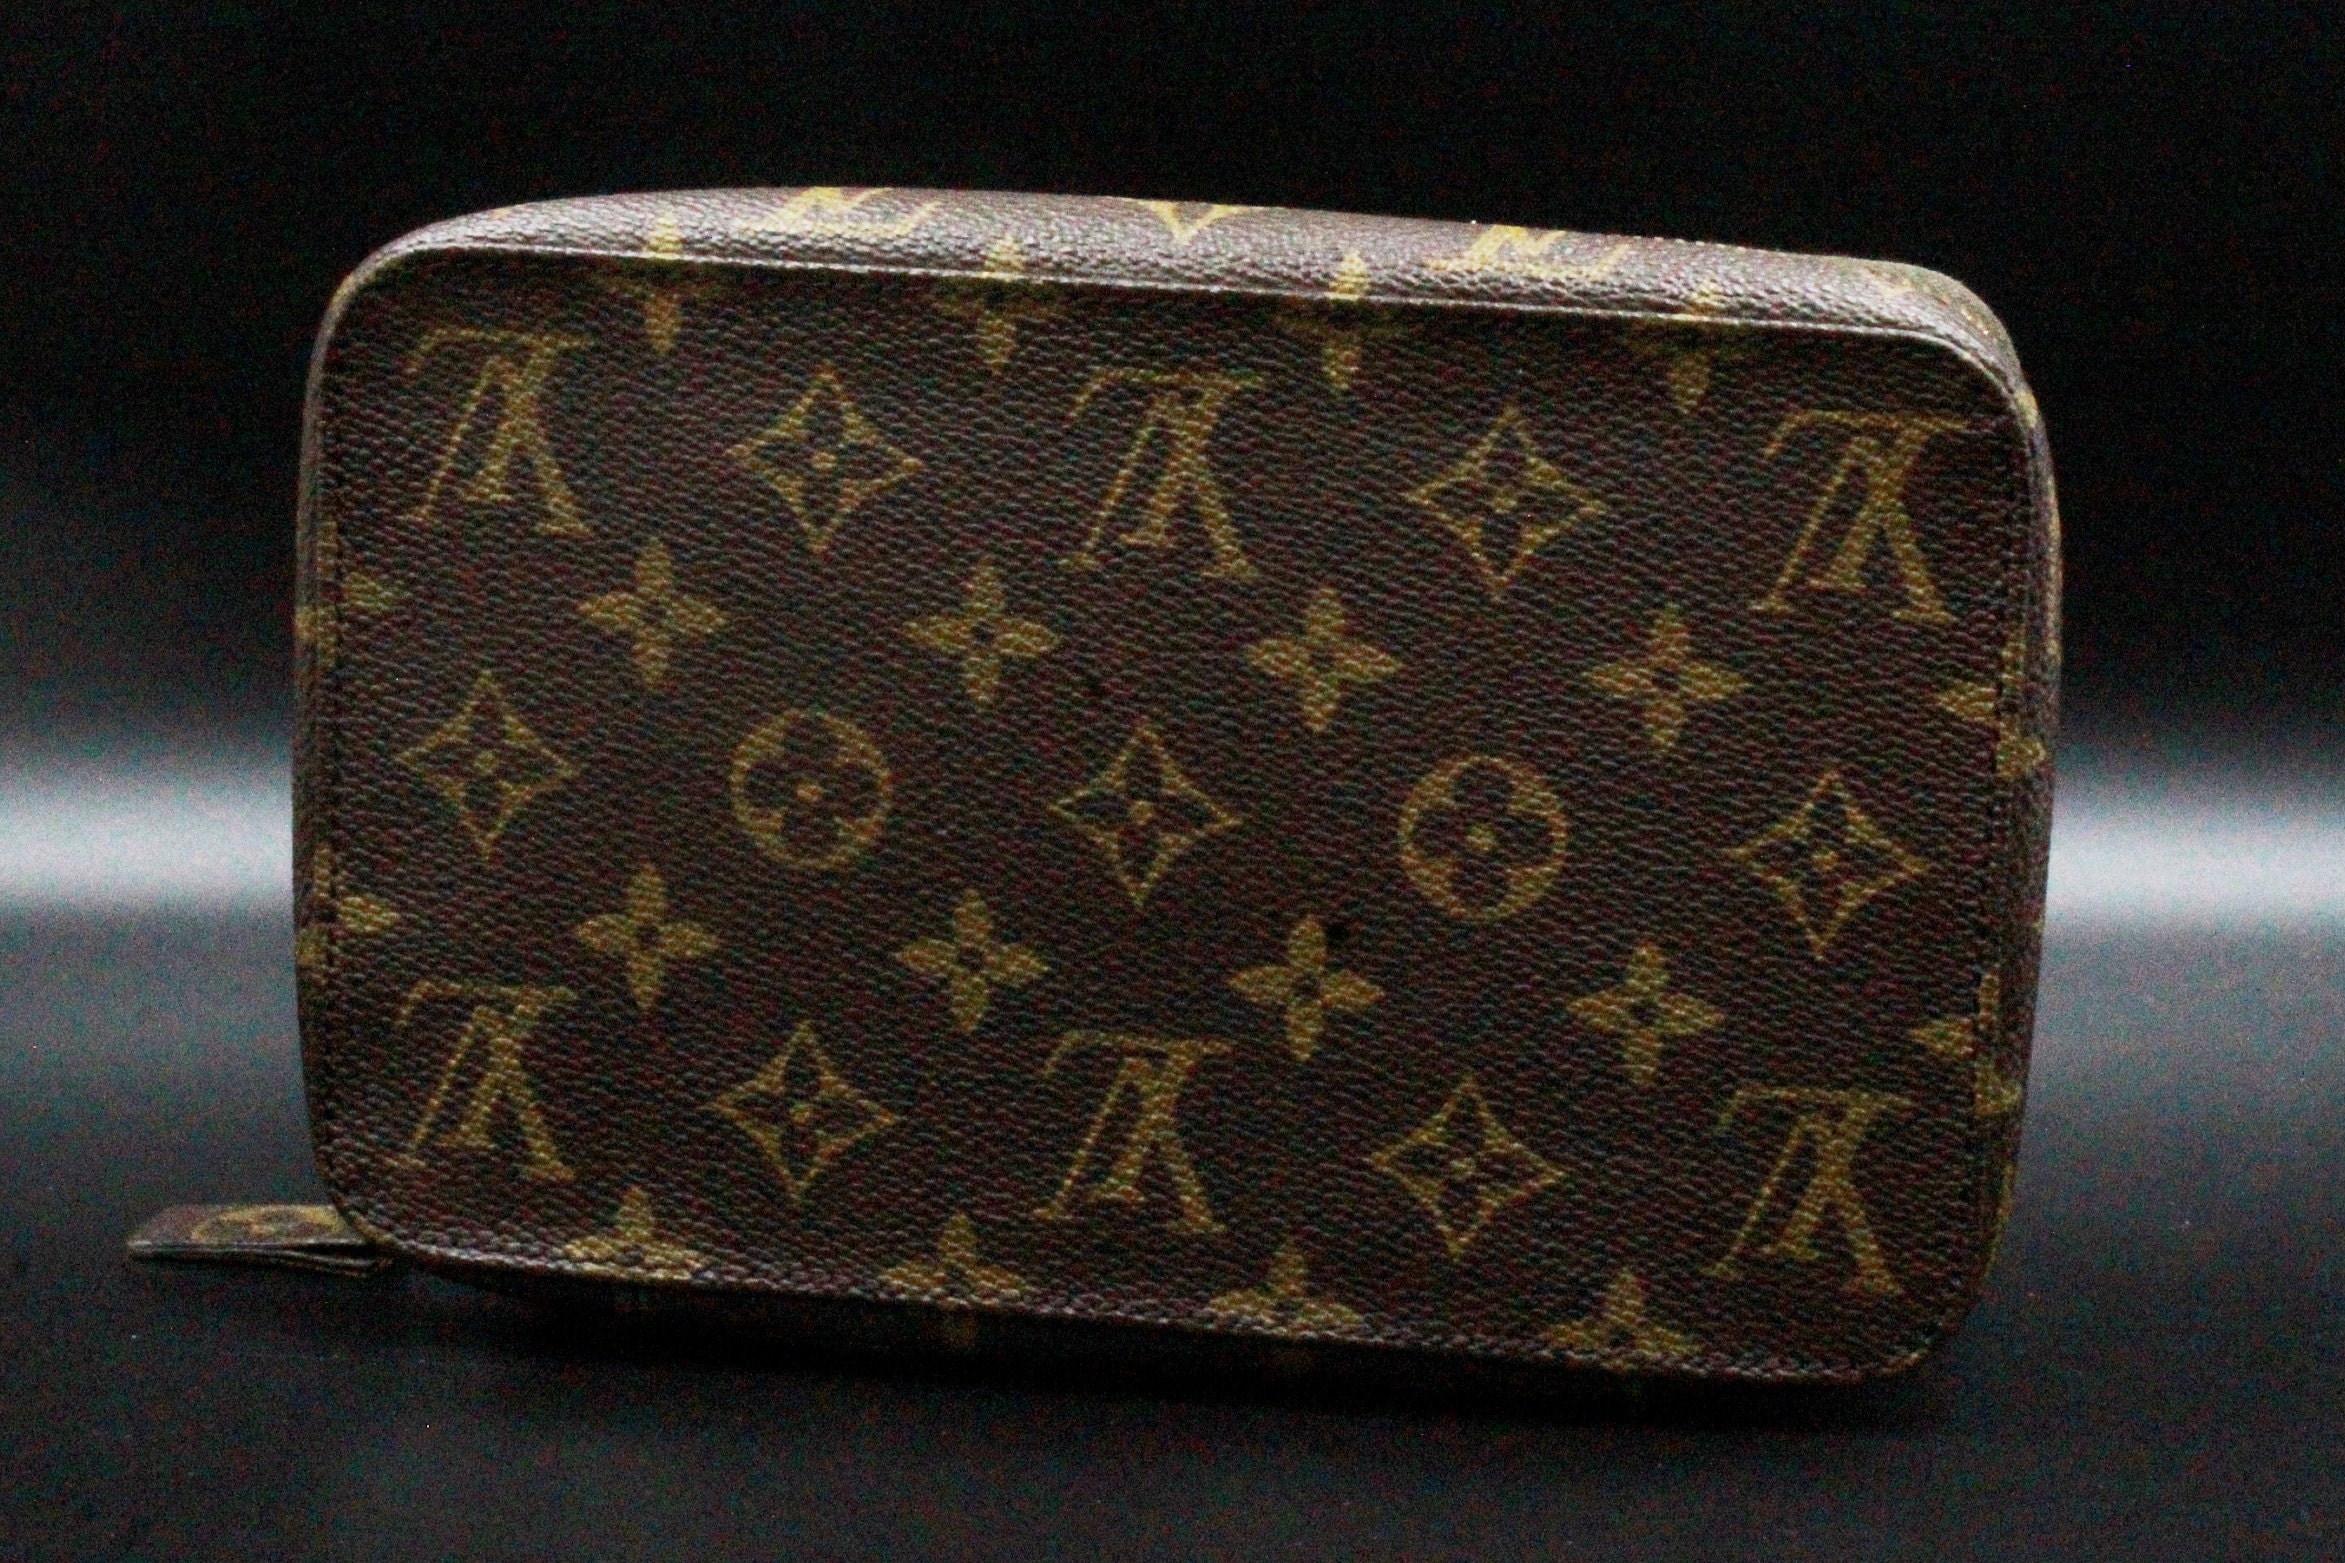 Authentic Louis Vuitton Box & More! 5.25”x 3.5” x 1” Wallet / Jewelry Size